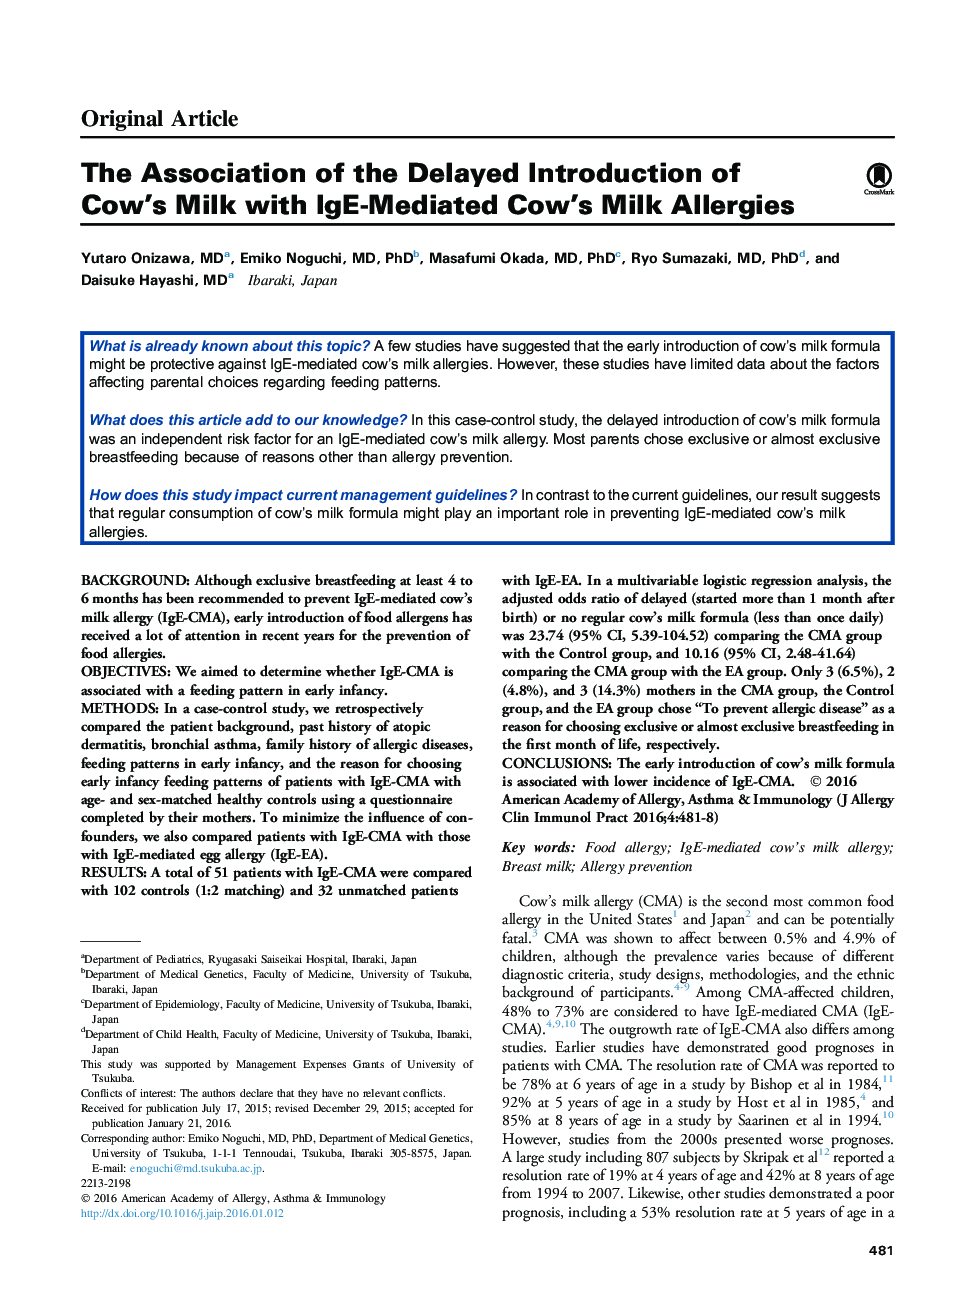 The Association of the Delayed Introduction of Cow's Milk with IgE-Mediated Cow's Milk Allergies